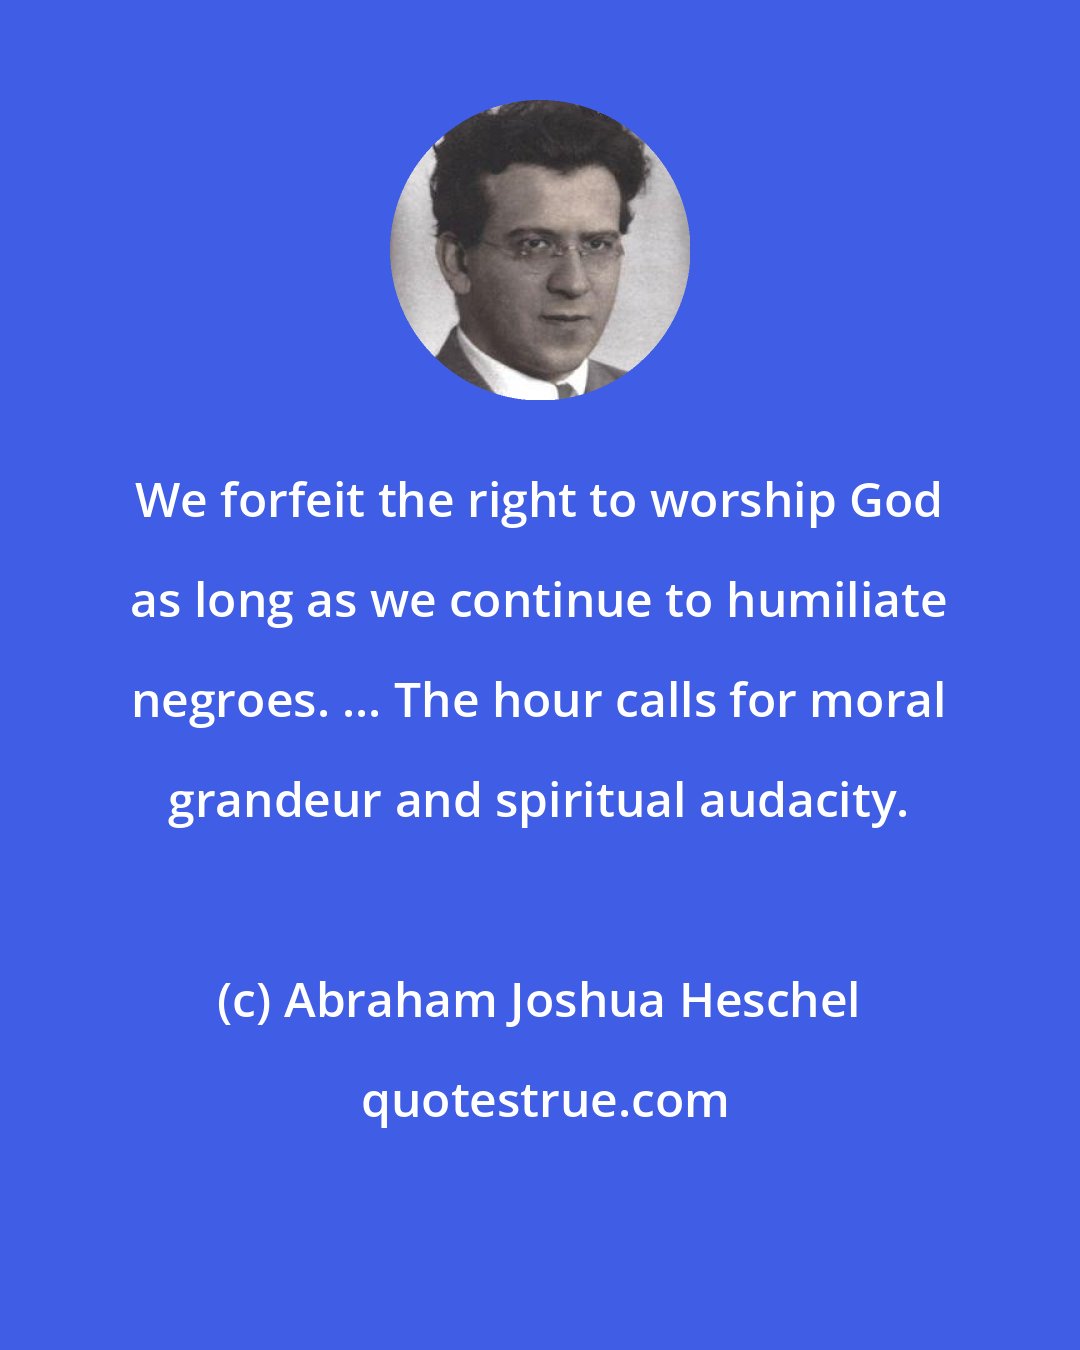 Abraham Joshua Heschel: We forfeit the right to worship God as long as we continue to humiliate negroes. ... The hour calls for moral grandeur and spiritual audacity.